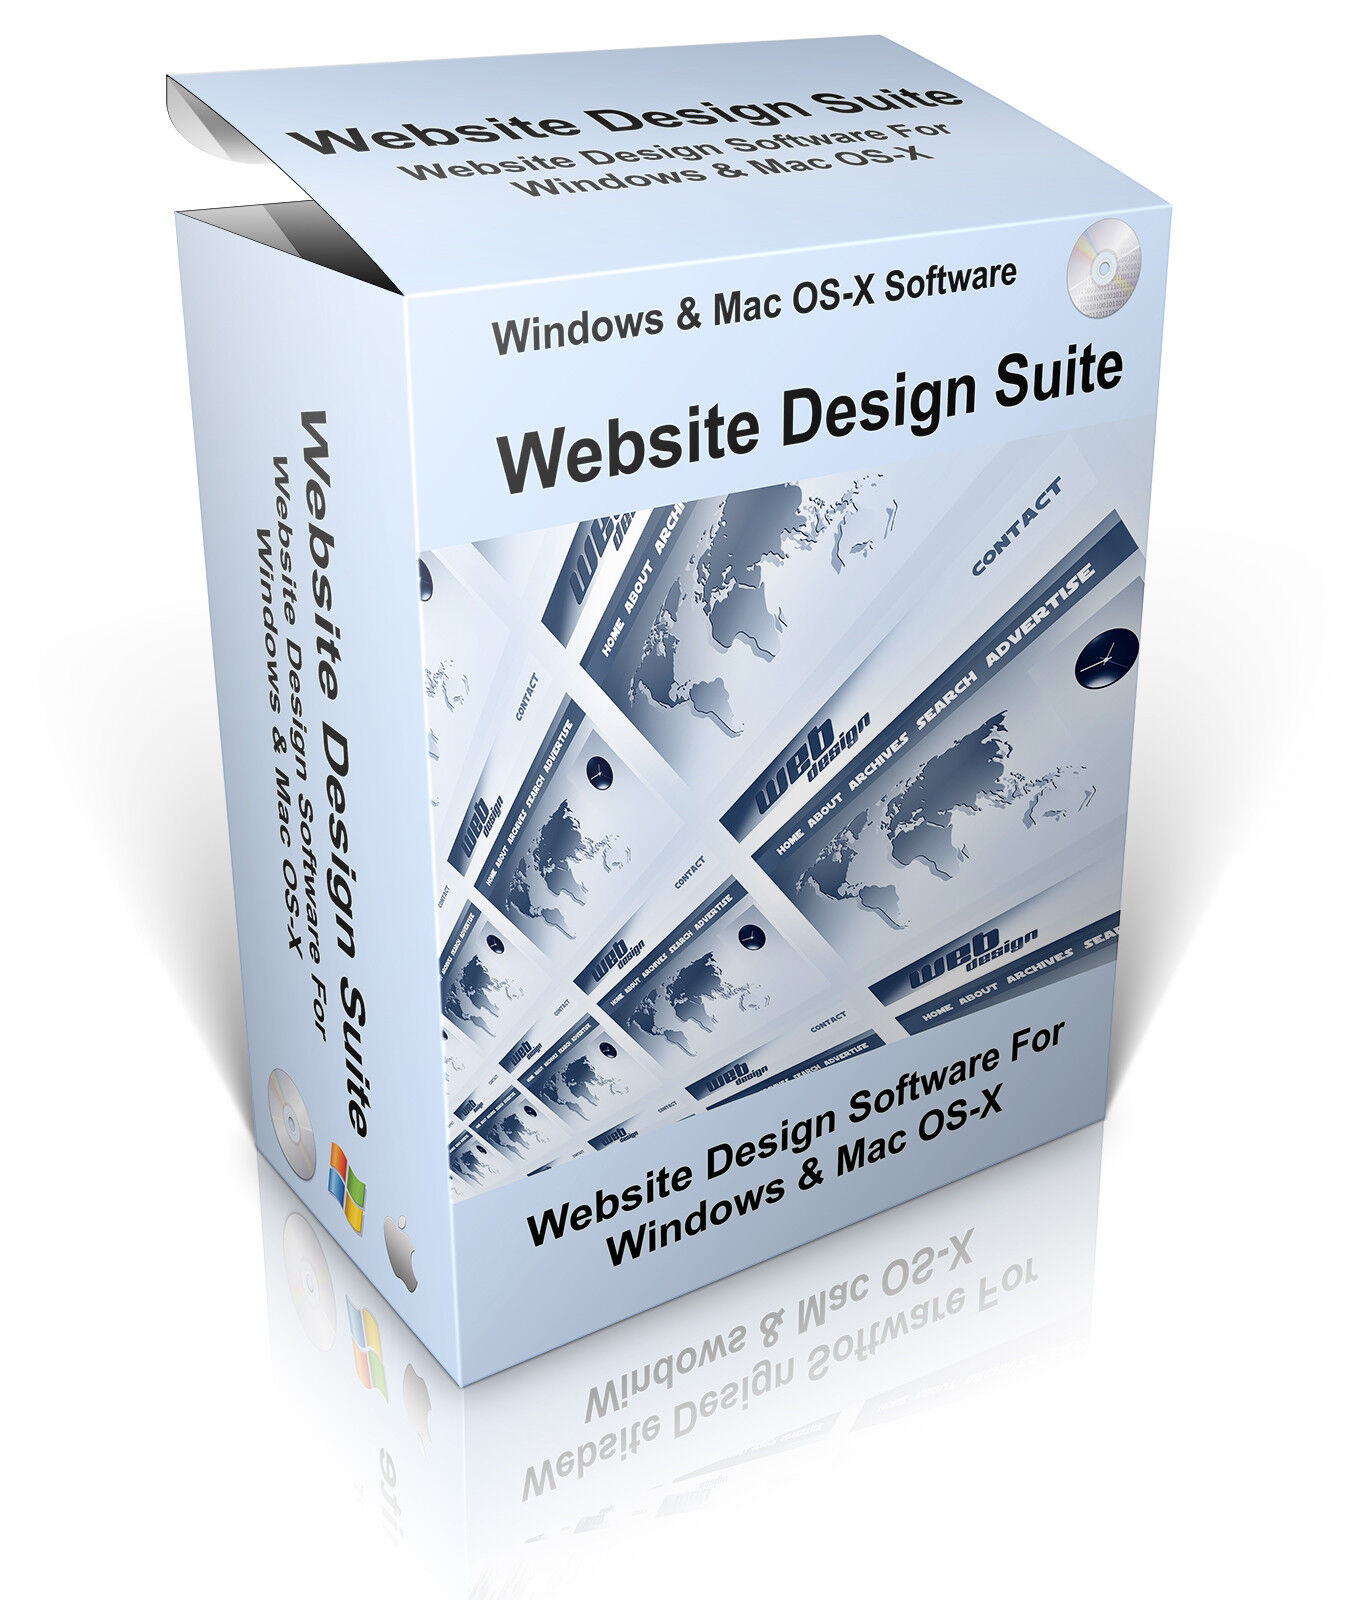 Website Design Suite Professional Software HTML/CSS Editor Edit Web Pages & Site